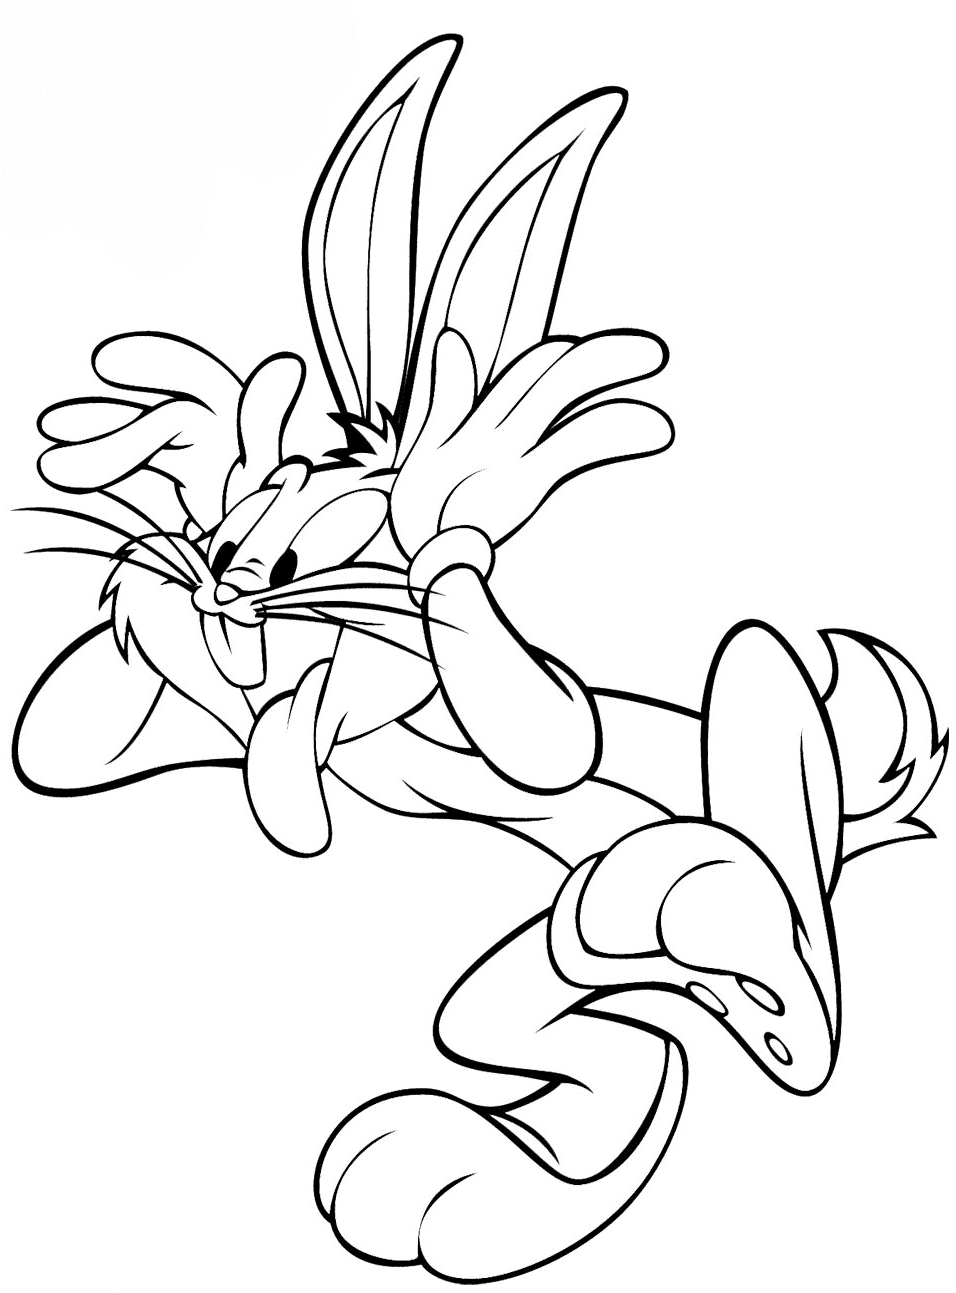 Silly Bugs Bunny van Looney Tunes-personages